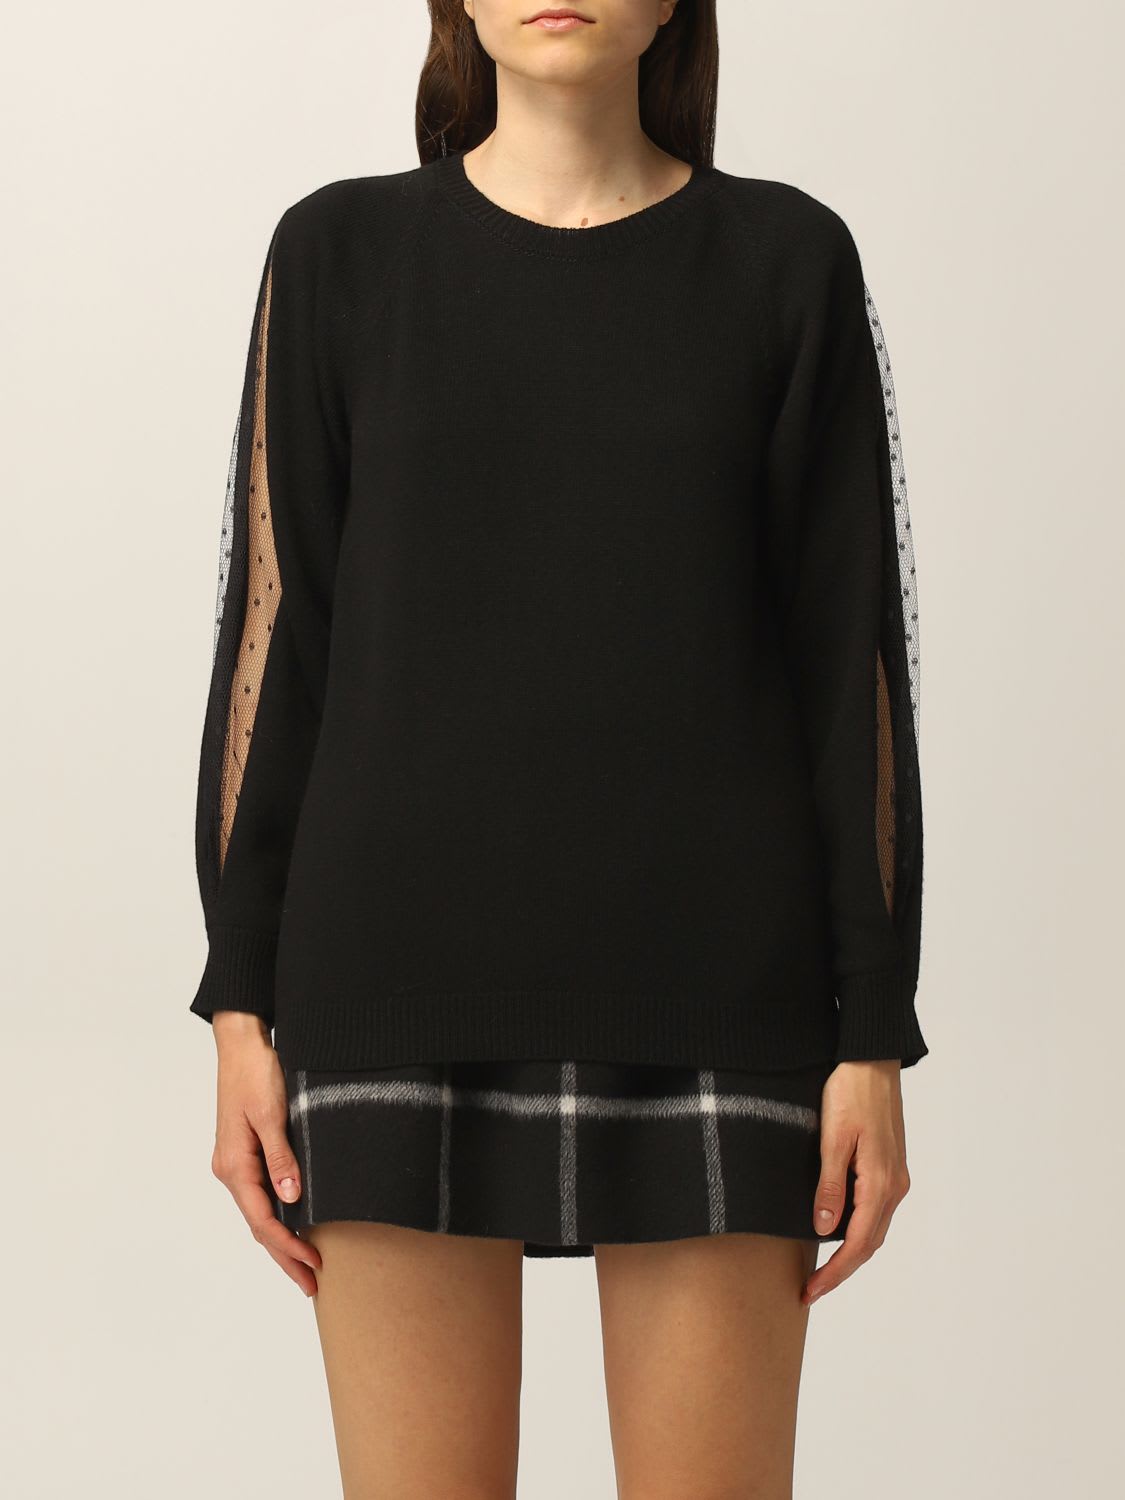 Red Valentino Sweater Red Valentino Sweater In Wool And Cashmere Blend